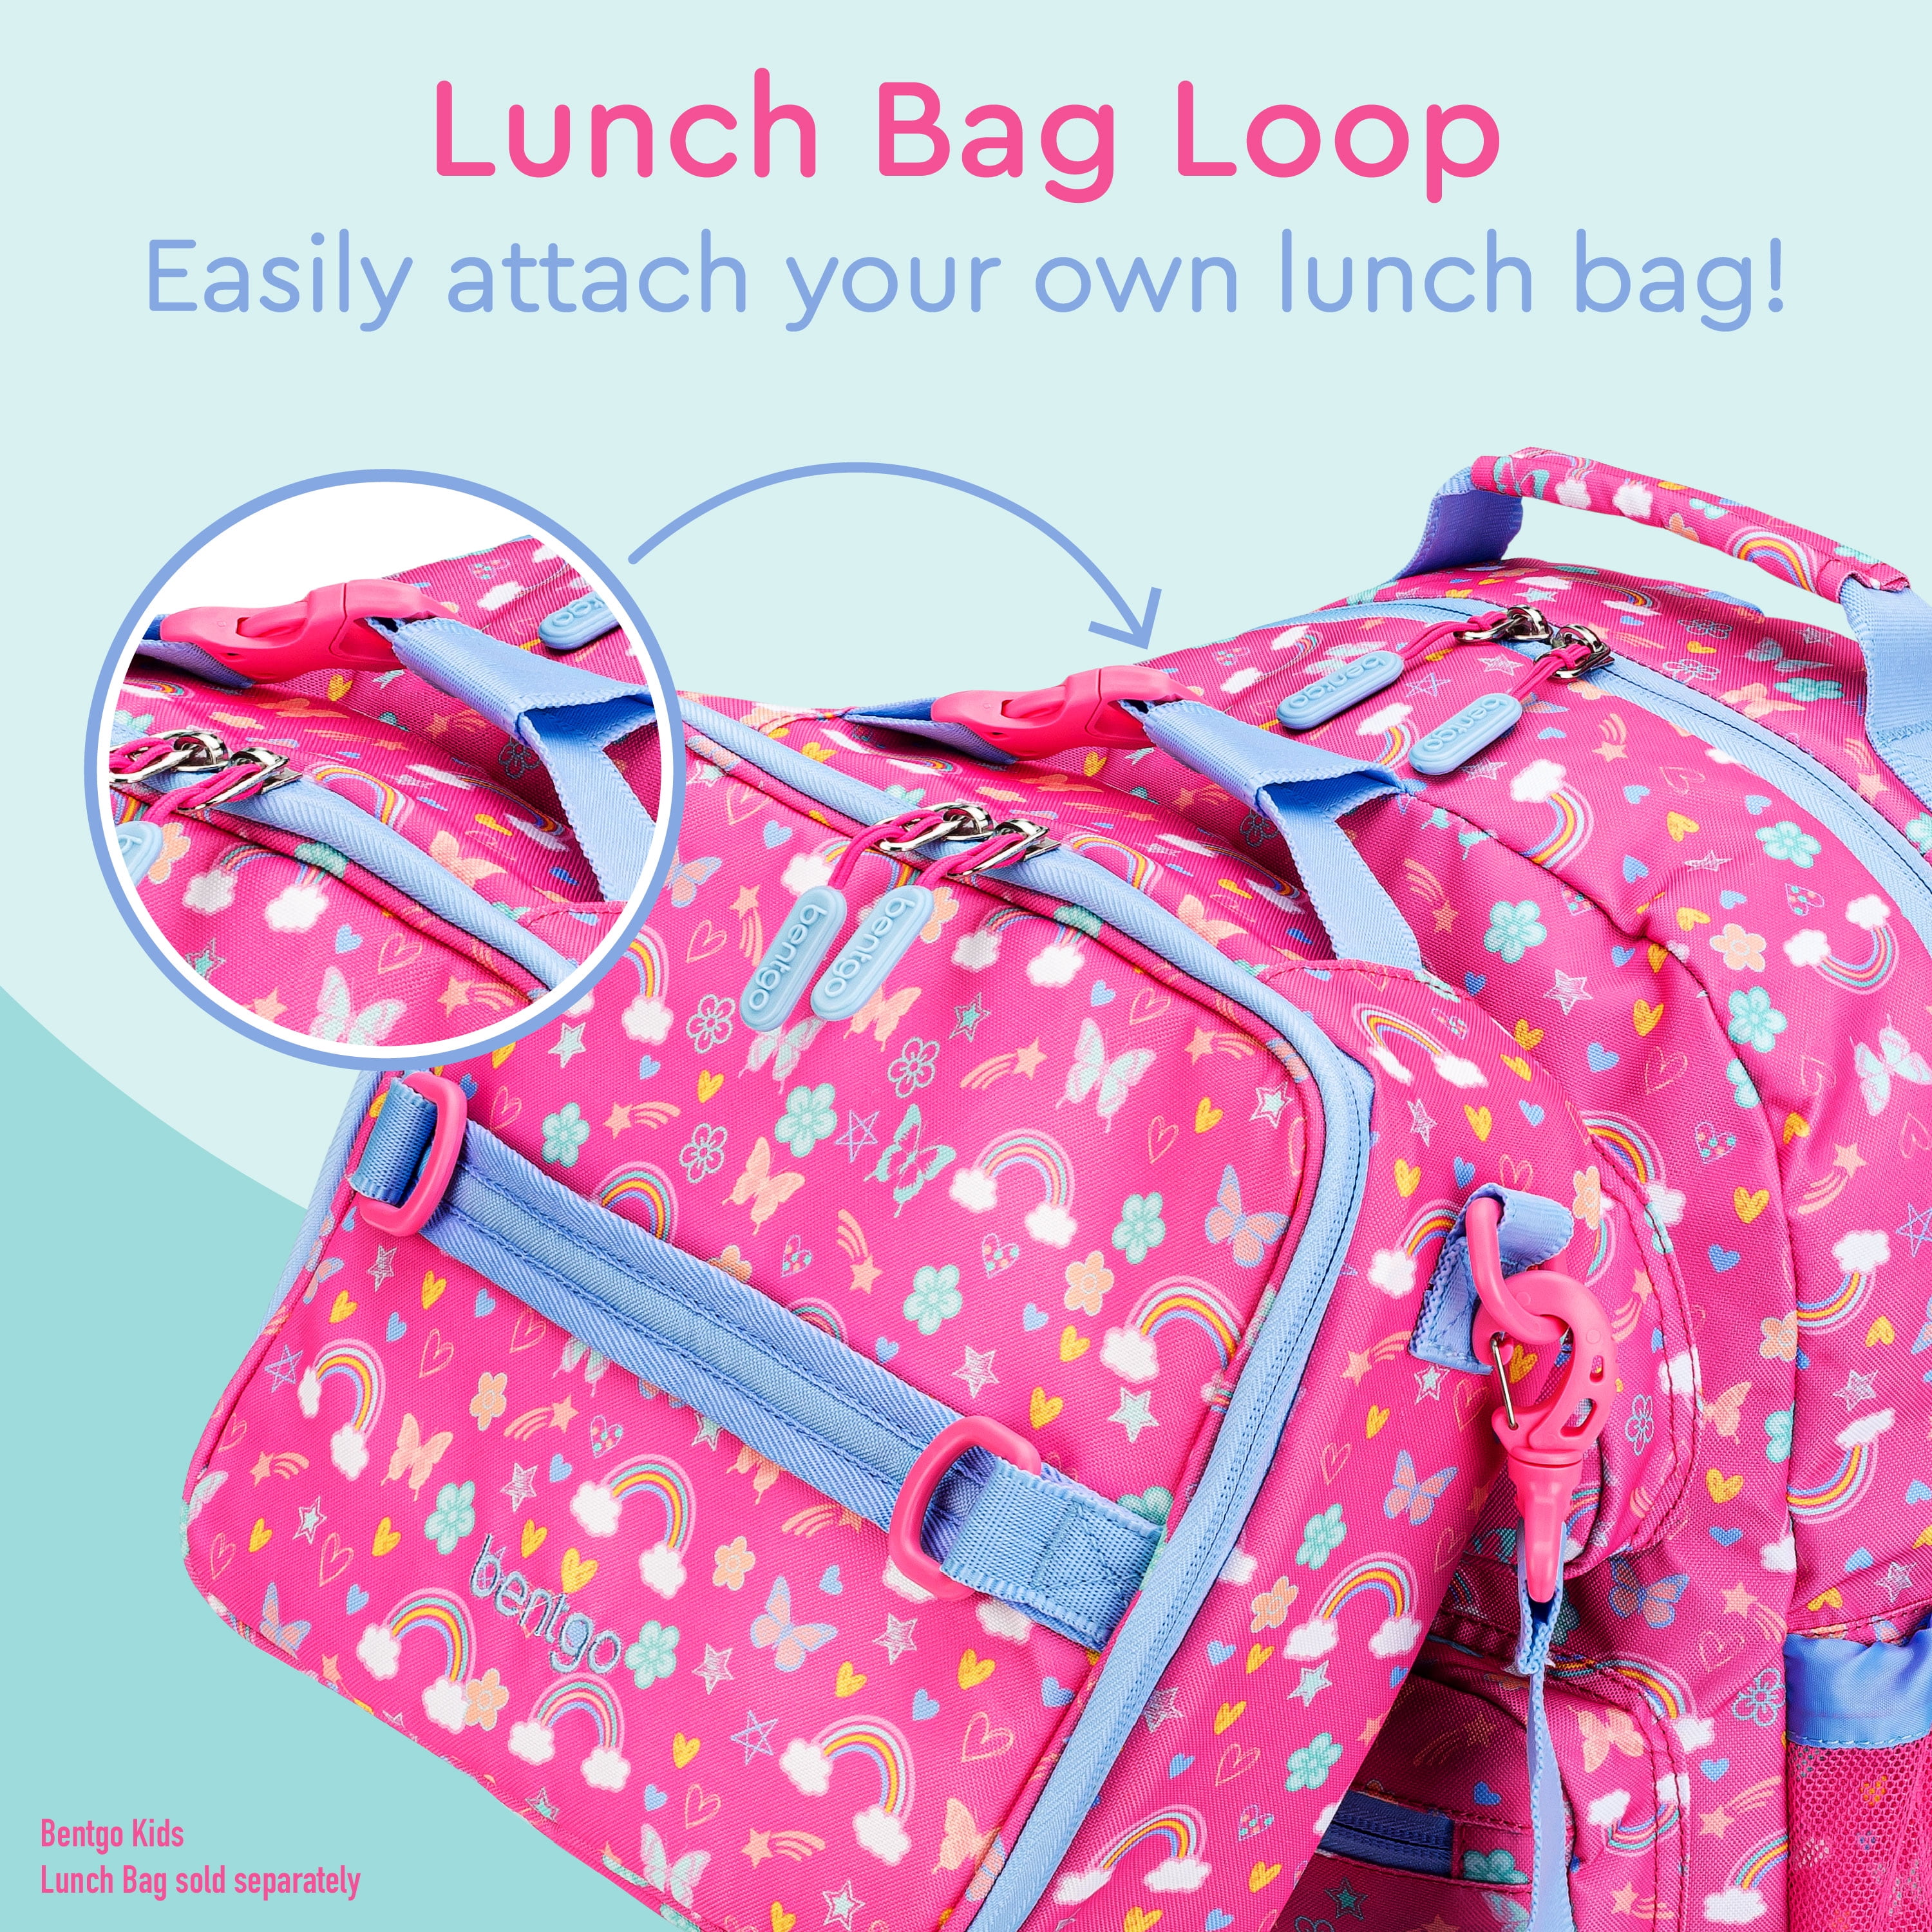  Bentgo® Kids Backpack - Lightweight 14” in Unique Prints for  School, Travel, & Daycare Roomy Interior, Durable Water-Resistant Fabric,  Loop Lunch Bag (Bug Buddies)